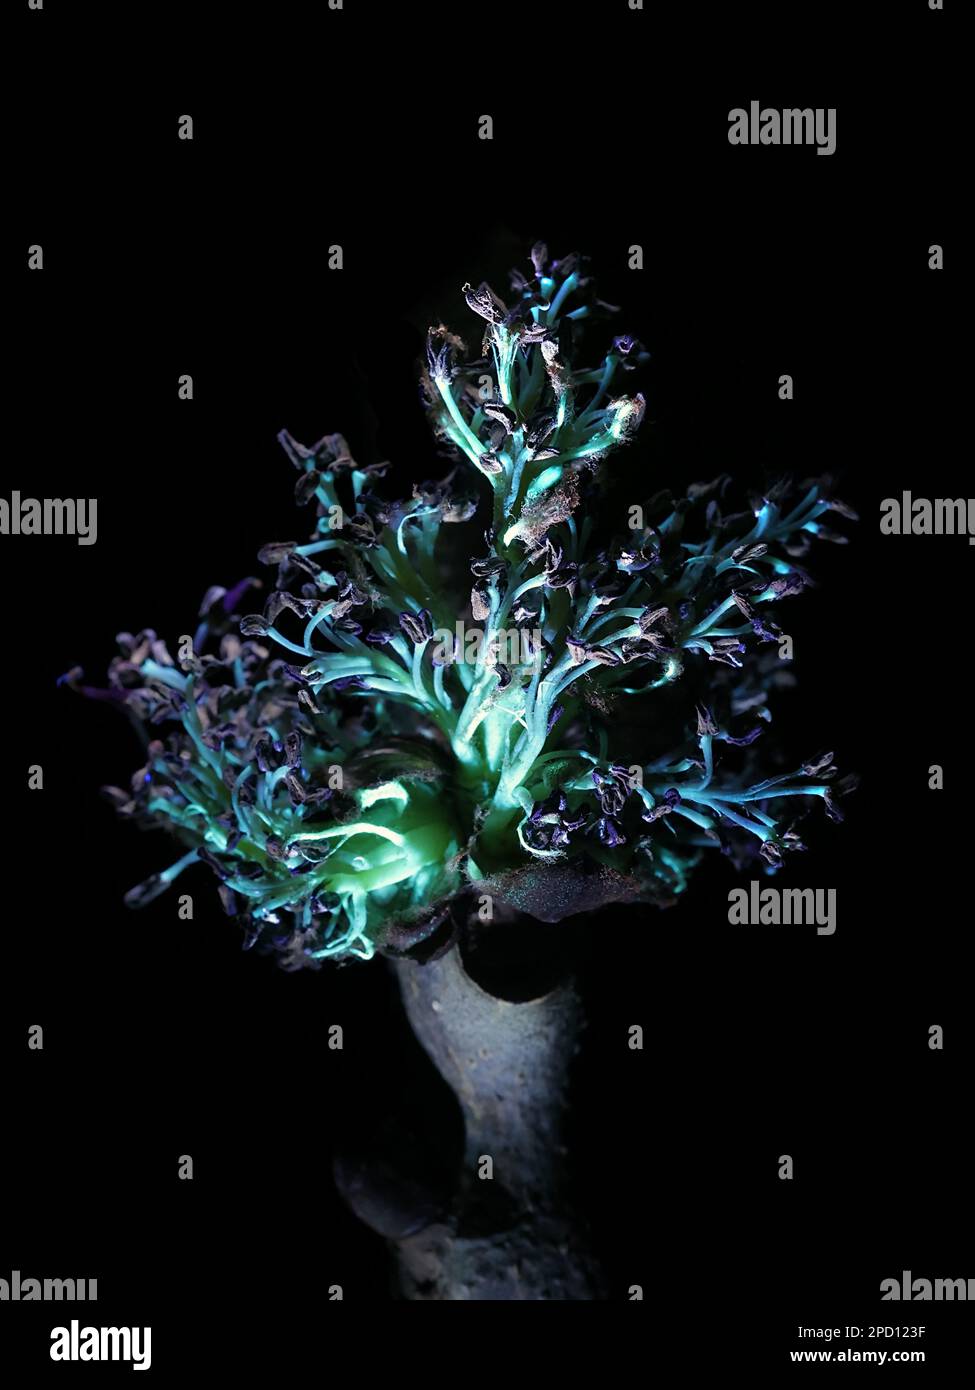 Fluorescence of flowers of common ash, Fraxinus excelsior, photographed in ultraviolet light (365 nm) Stock Photo